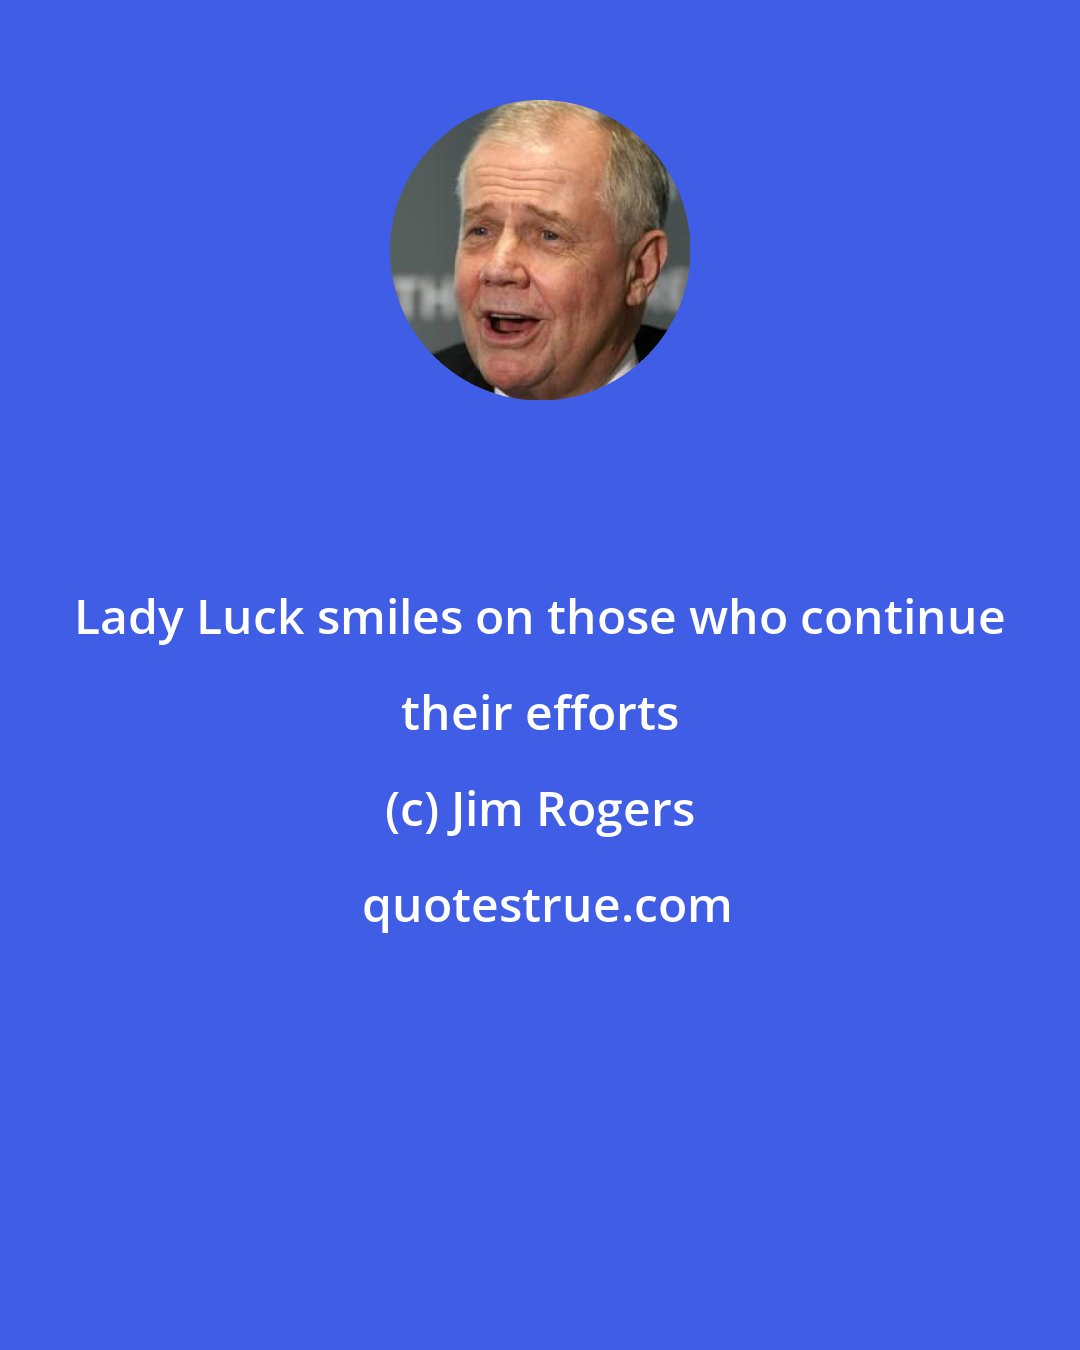 Jim Rogers: Lady Luck smiles on those who continue their efforts